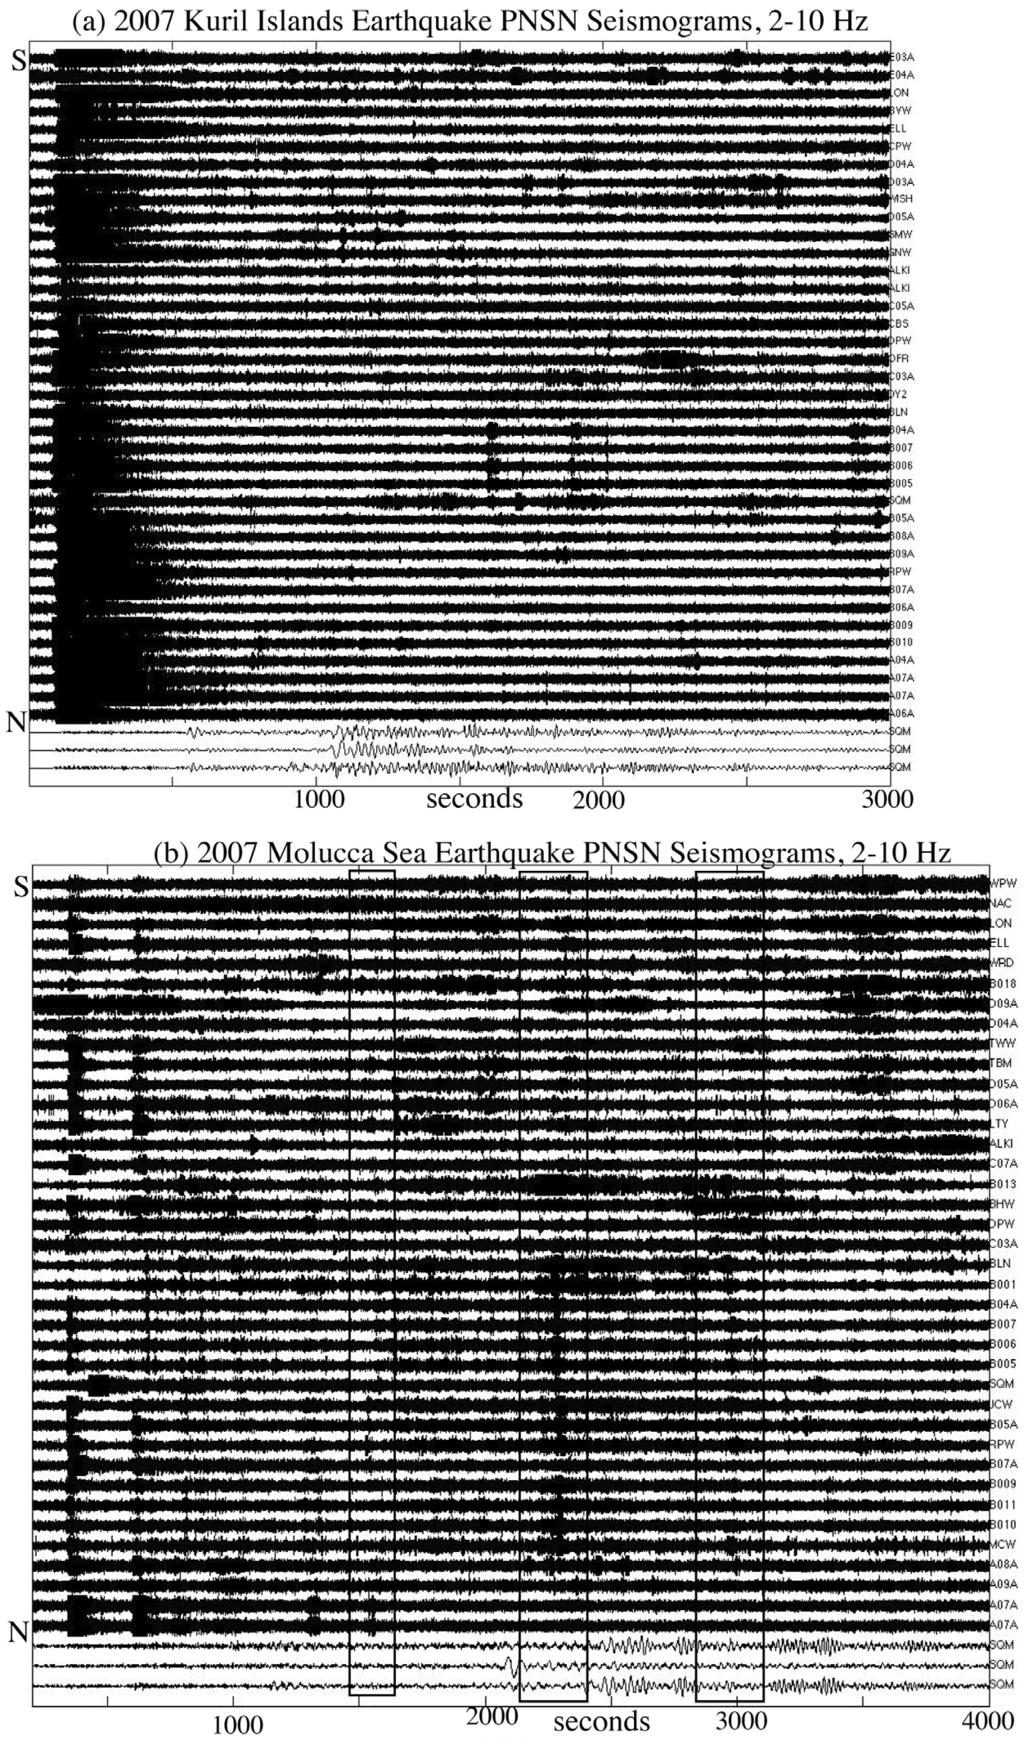 Figure 10. (a) Record section of PNSN waveforms filtered between 2 10 Hz arranged by recording station latitude during the arrival of waves from the 2007 M8.1 Kuril Islands earthquake.